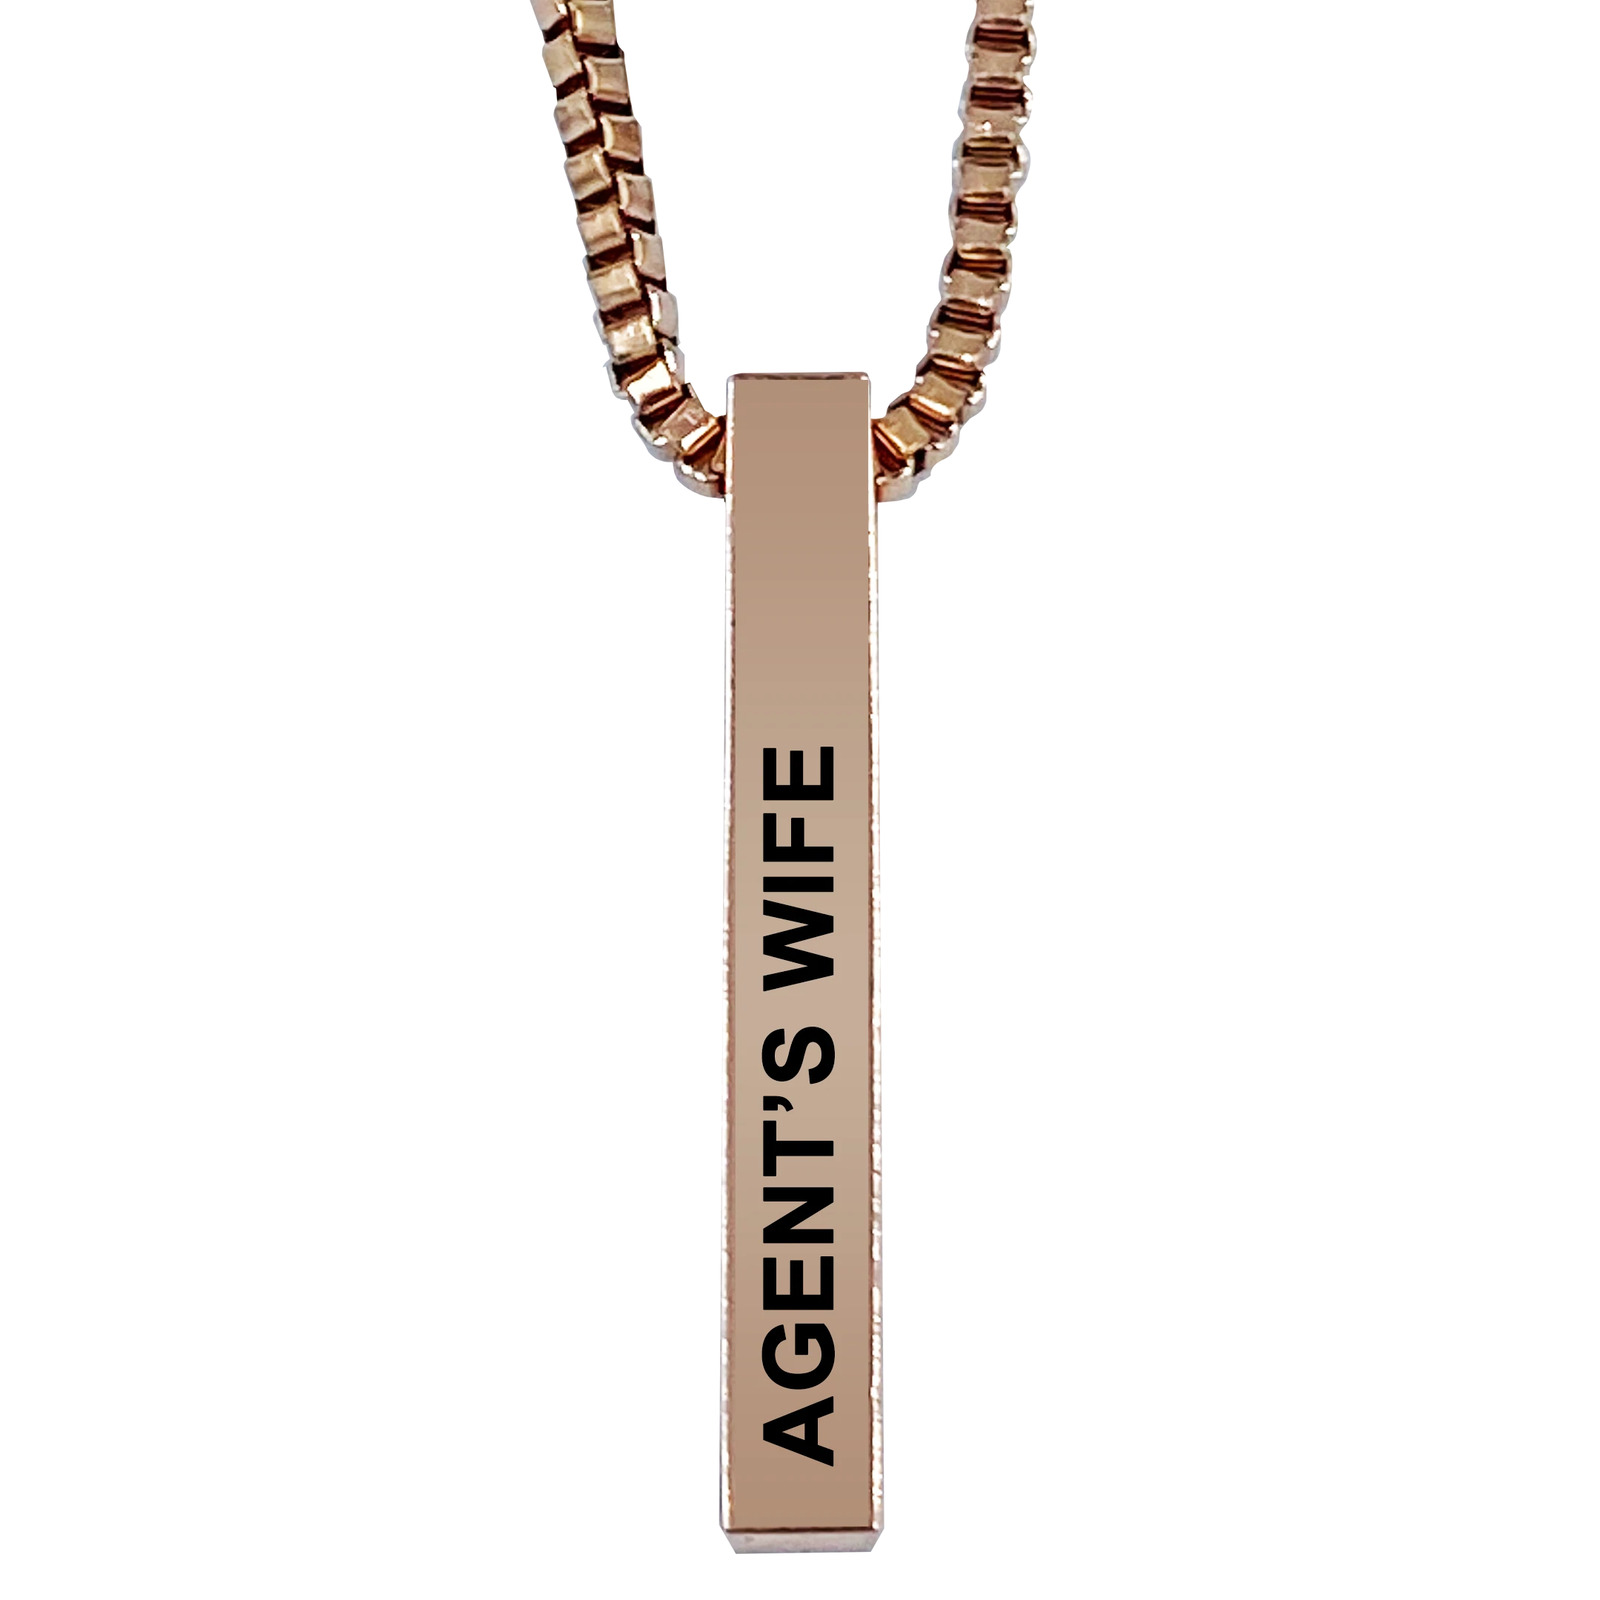 Agent's Wife Rose Gold Plated Pillar Bar Pendant Necklace Gift Mother's Day Chri